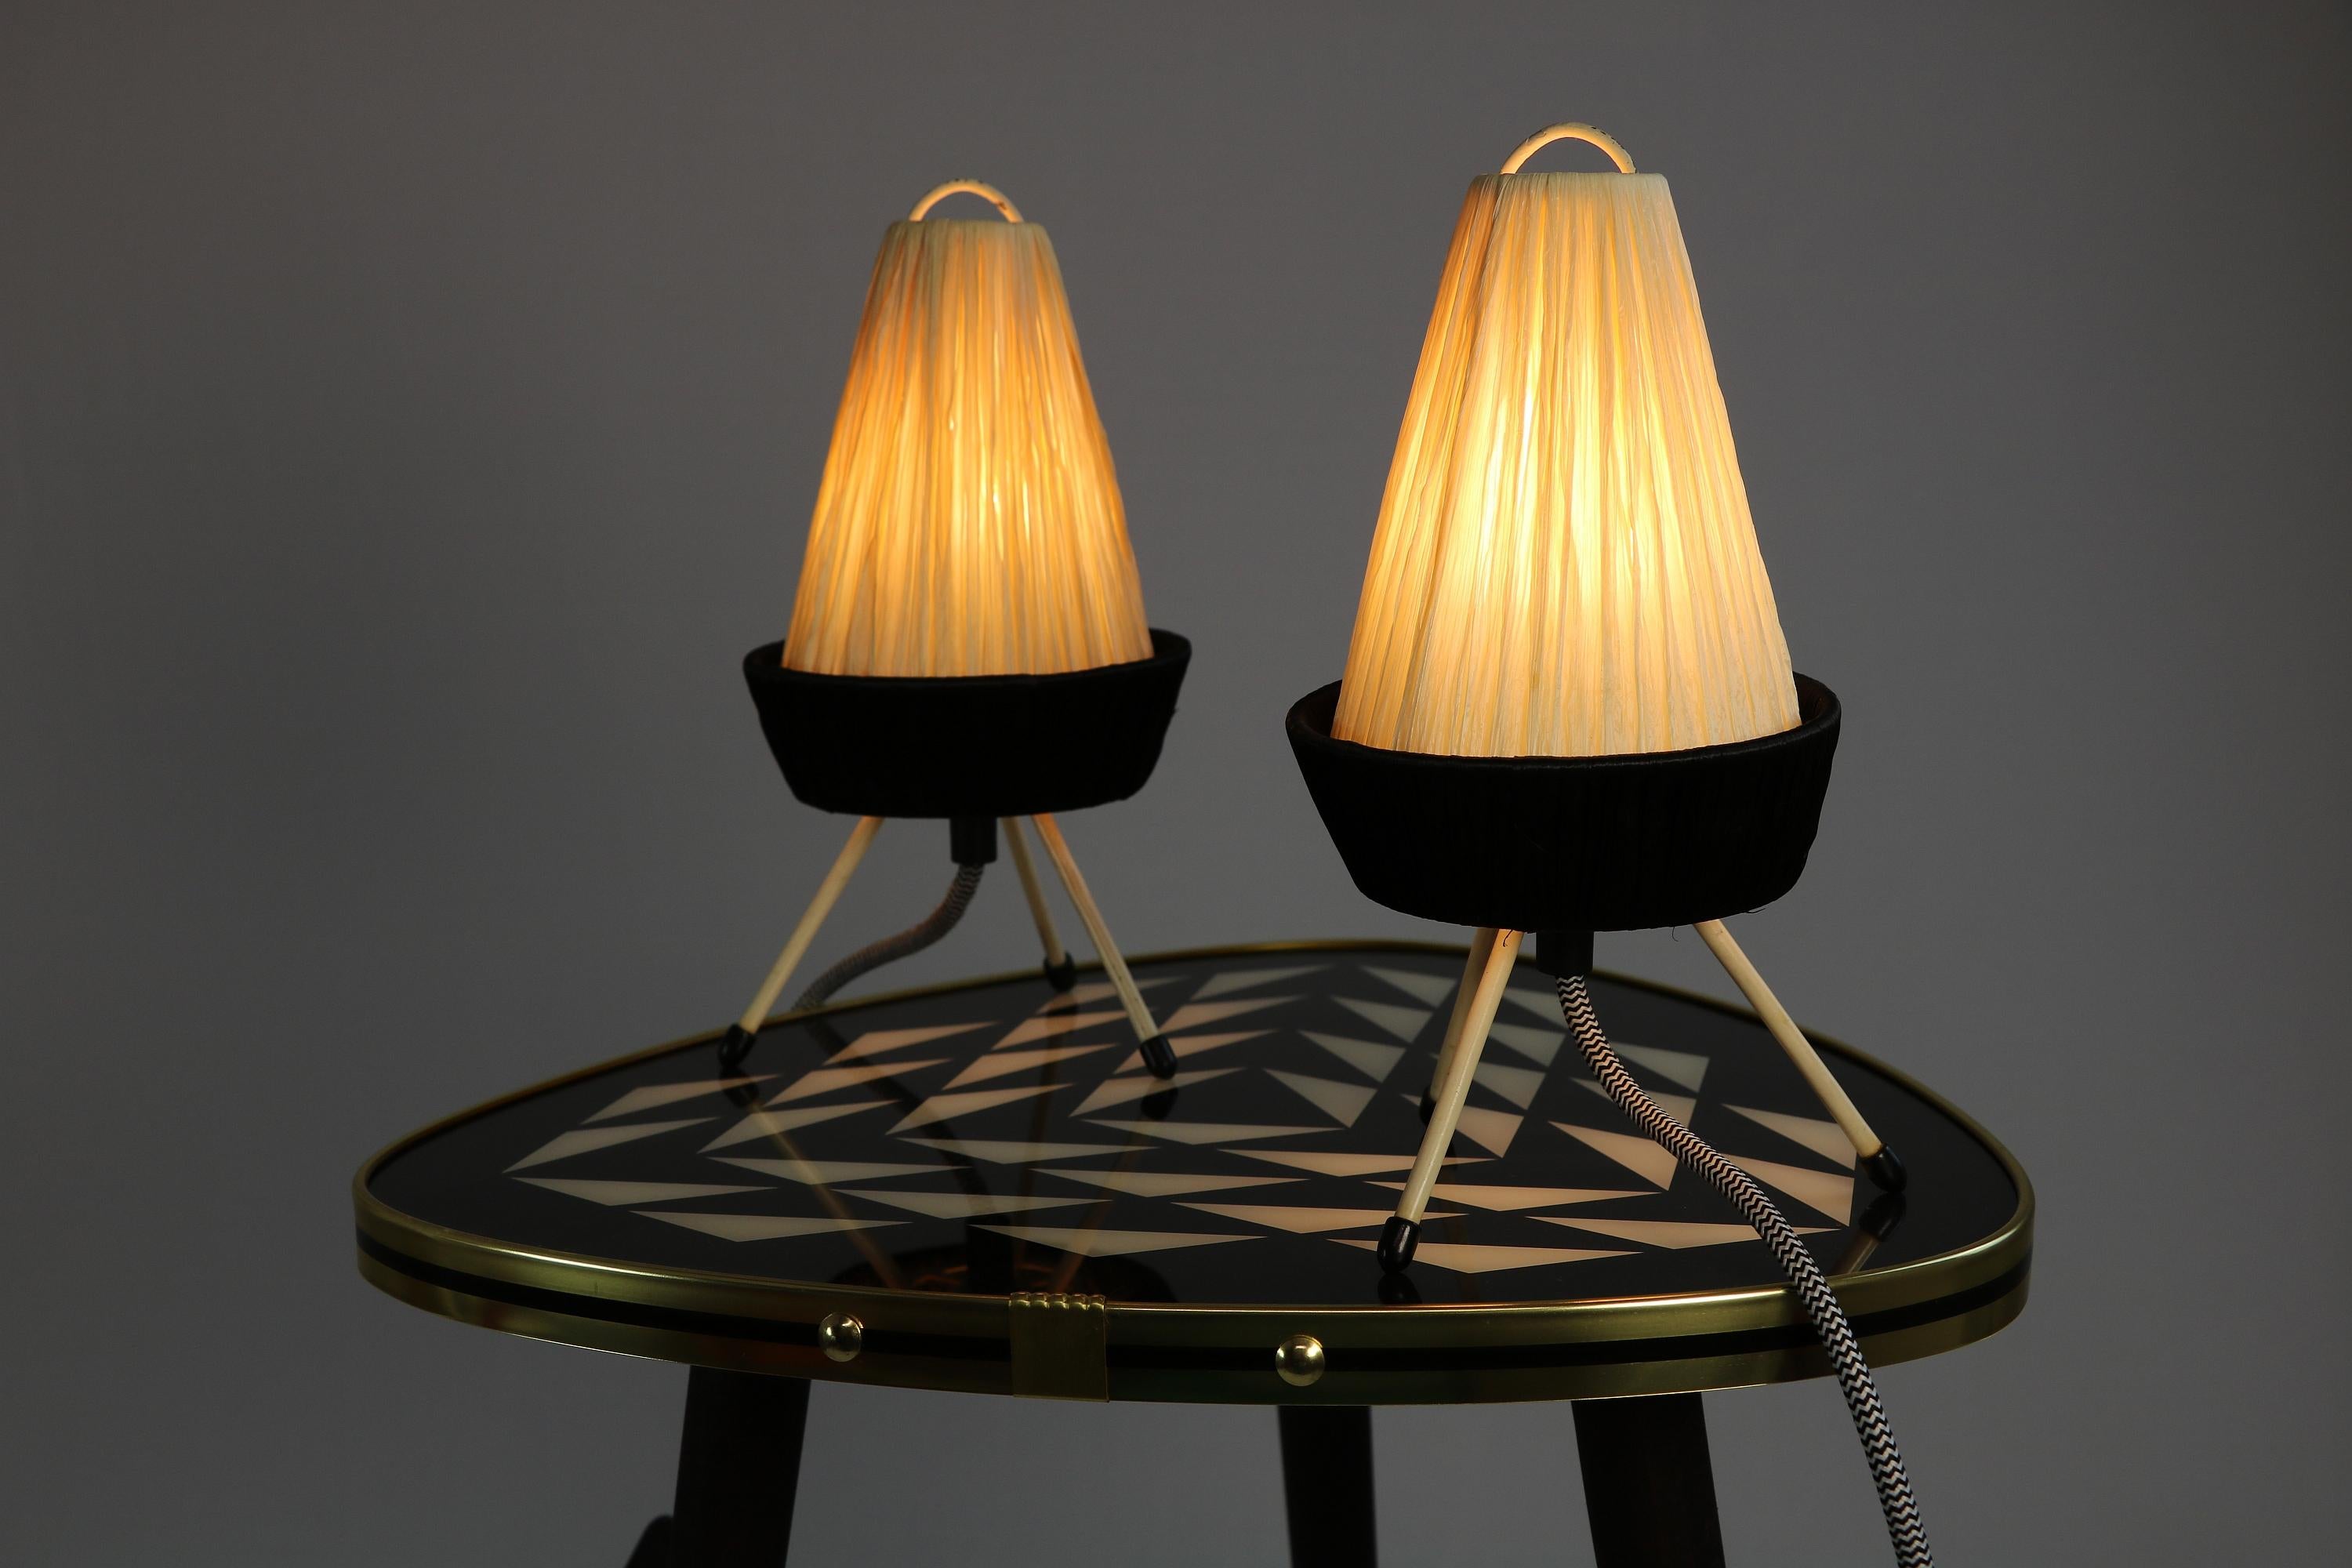 Set of 2 Filigree Table Lamps, Raffia Shade, Germany, Tripod, 1950s For Sale 1